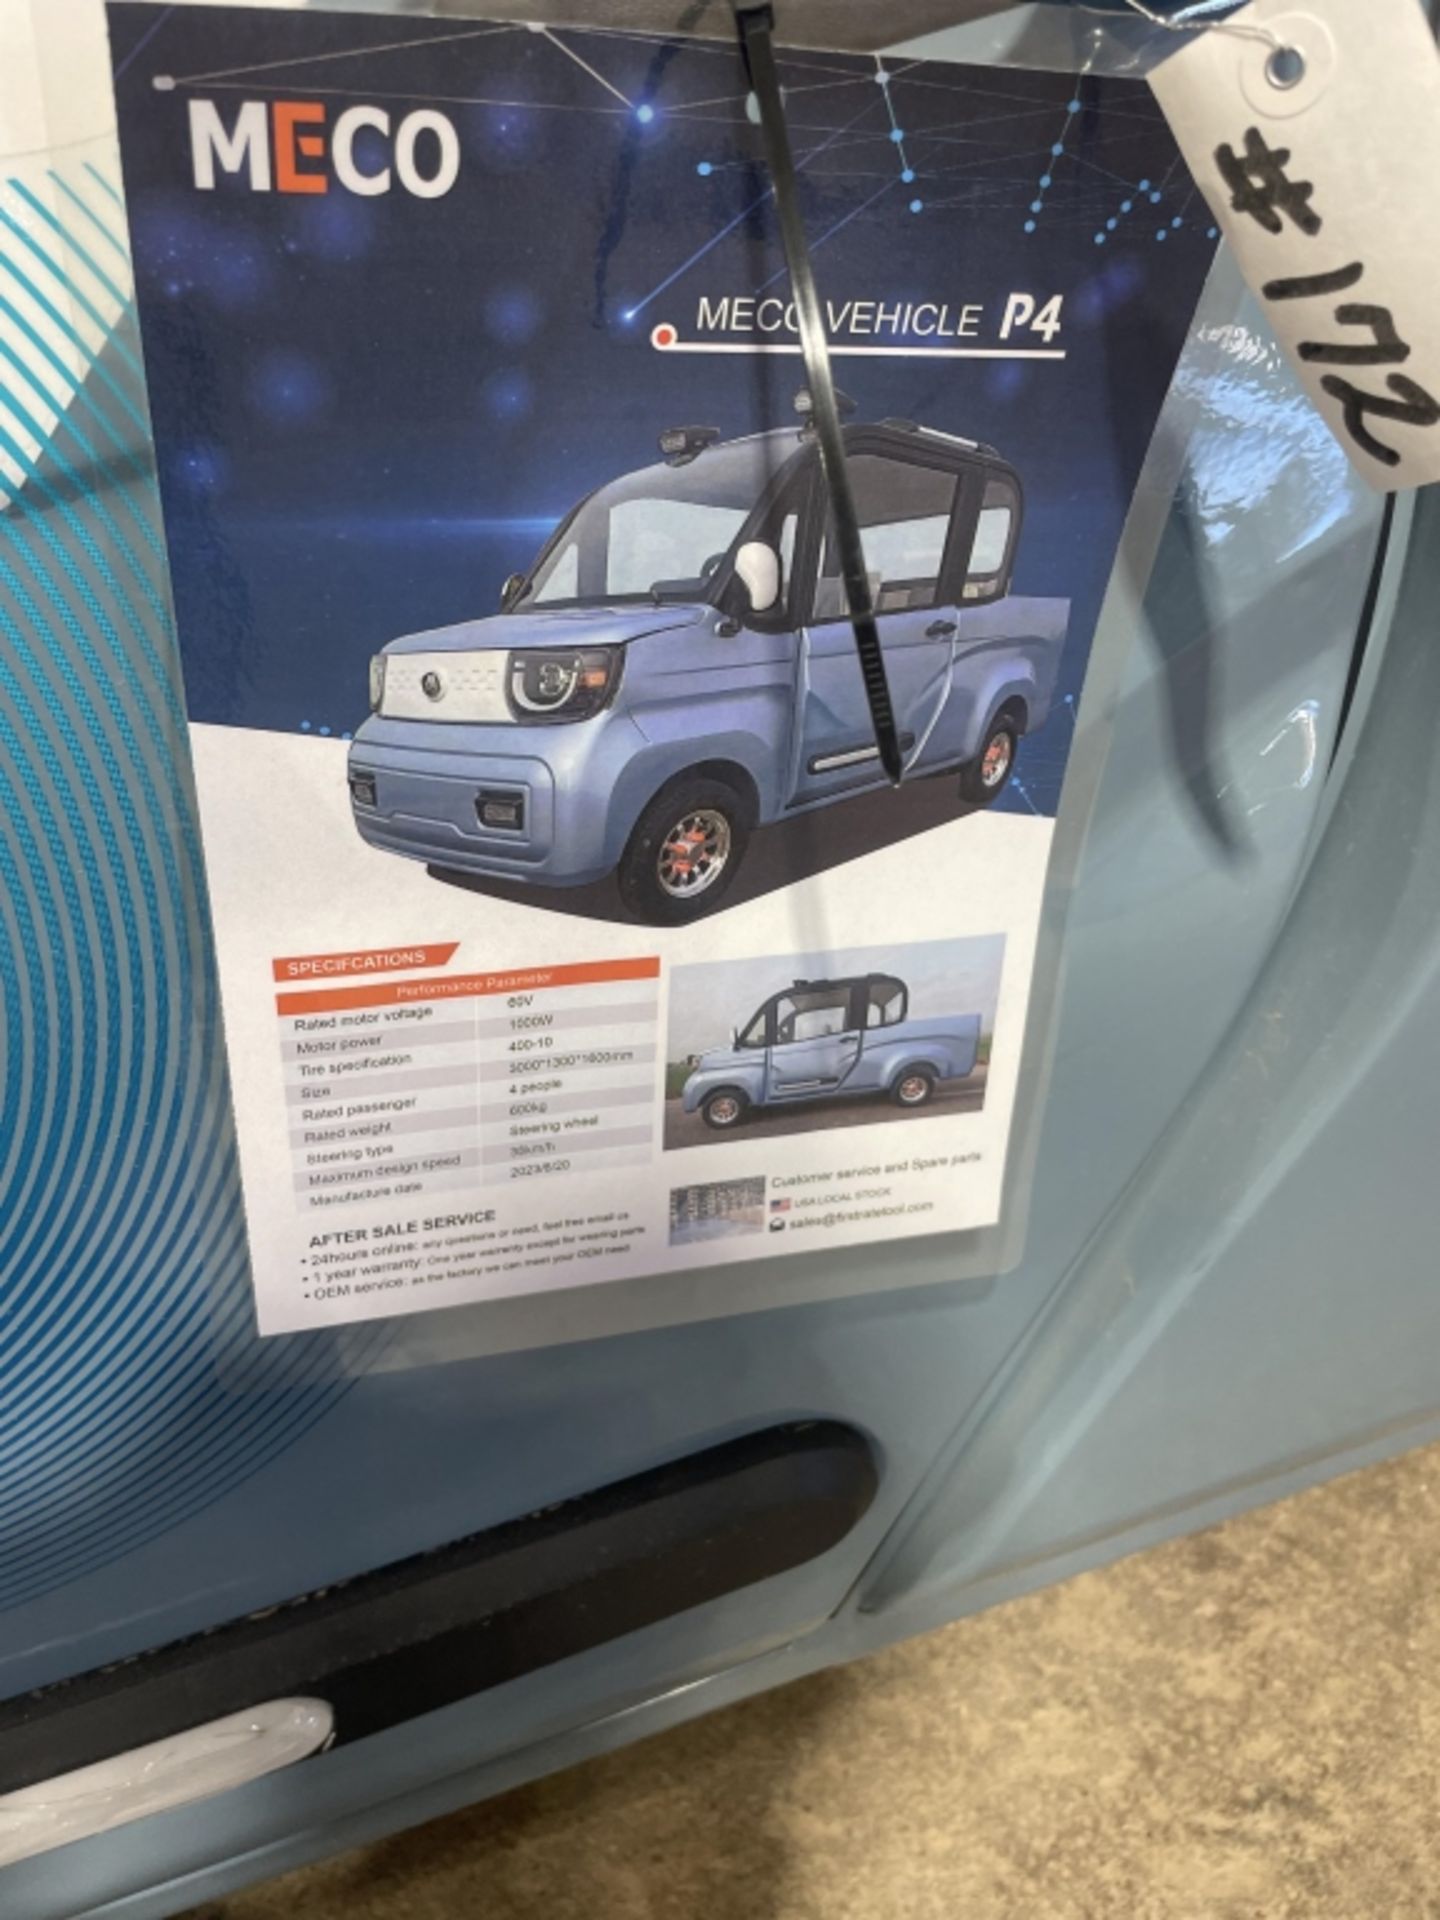 MECO P4 Electric Vehicle - Image 18 of 25